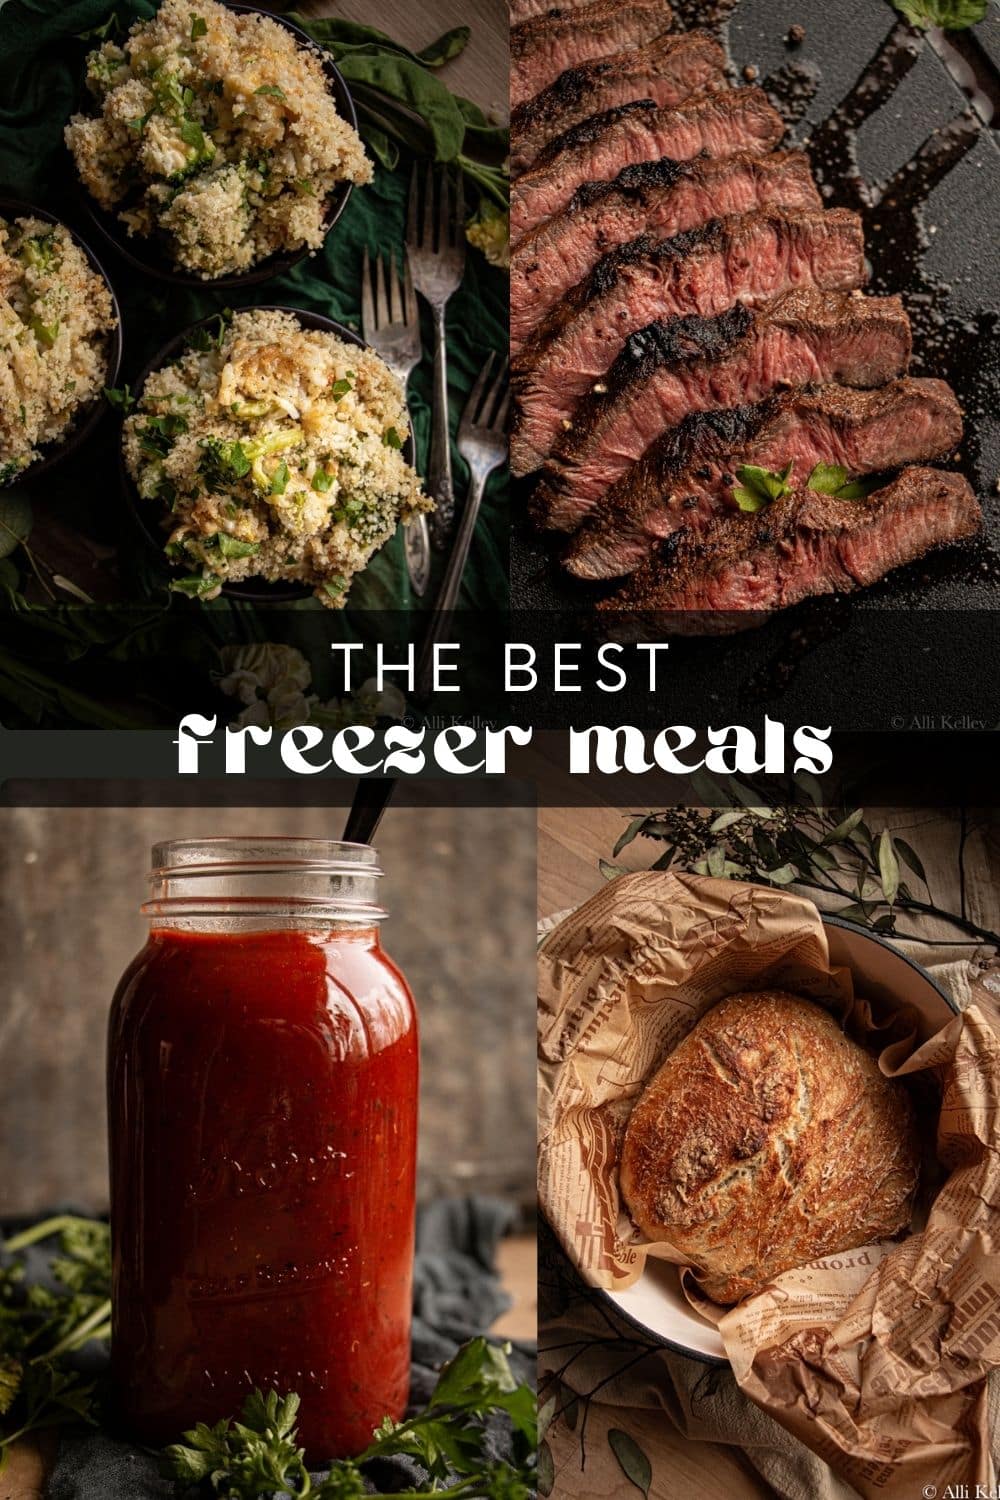 There's nothing better than having a delicious, home-cooked meal ready to go when you're in a rush or don't feel like cooking. These best freezer meals are perfect for busy families, meal preppers, new parents, or anyone looking to save time. They include everything from casseroles to crockpot meals and even options for freeze drying!